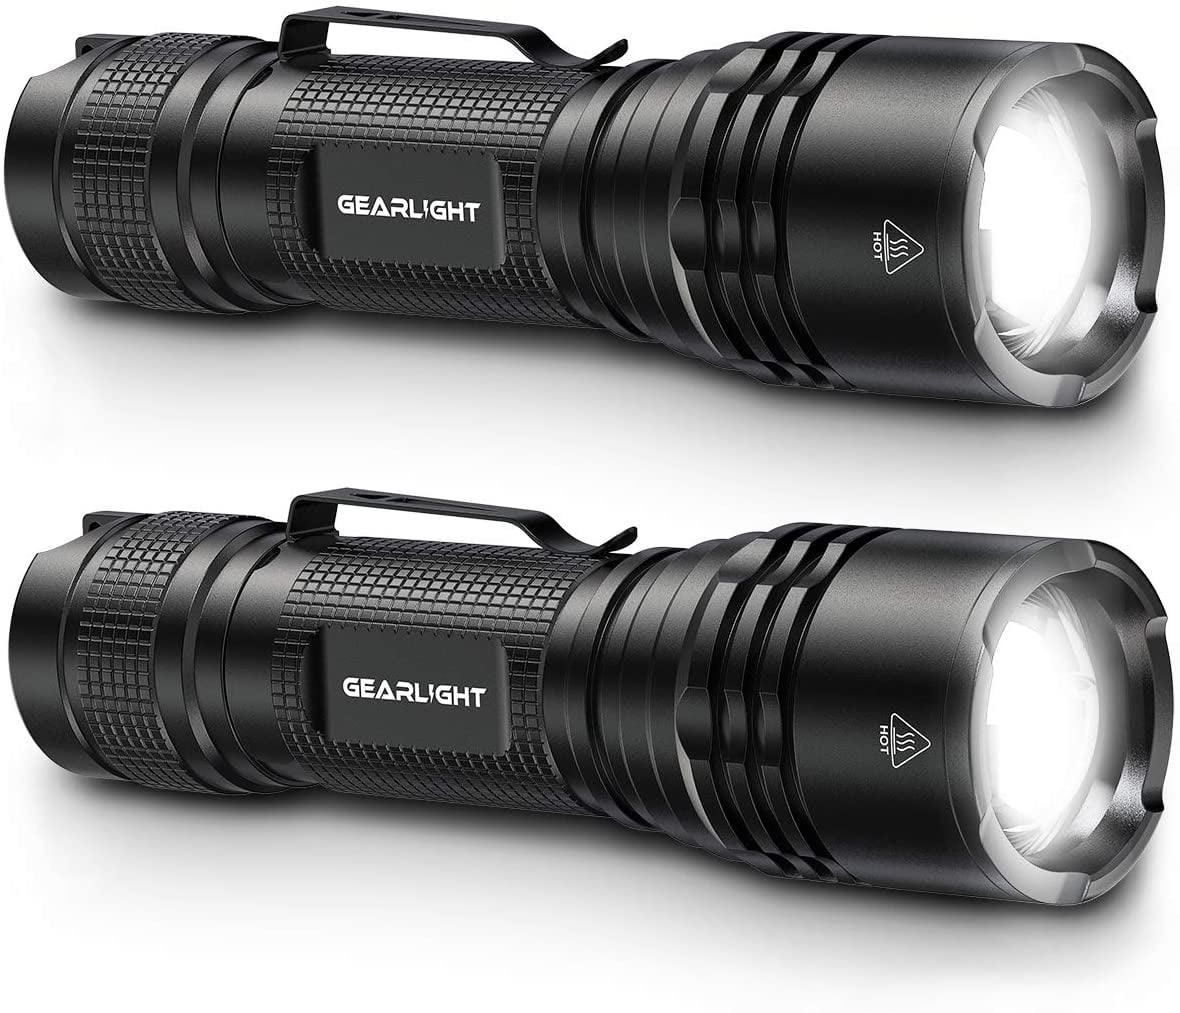 TAC LED Flashlight Pack - 2 Super Bright Compact Tactical Flashlights  (Gifts for Men & Women)